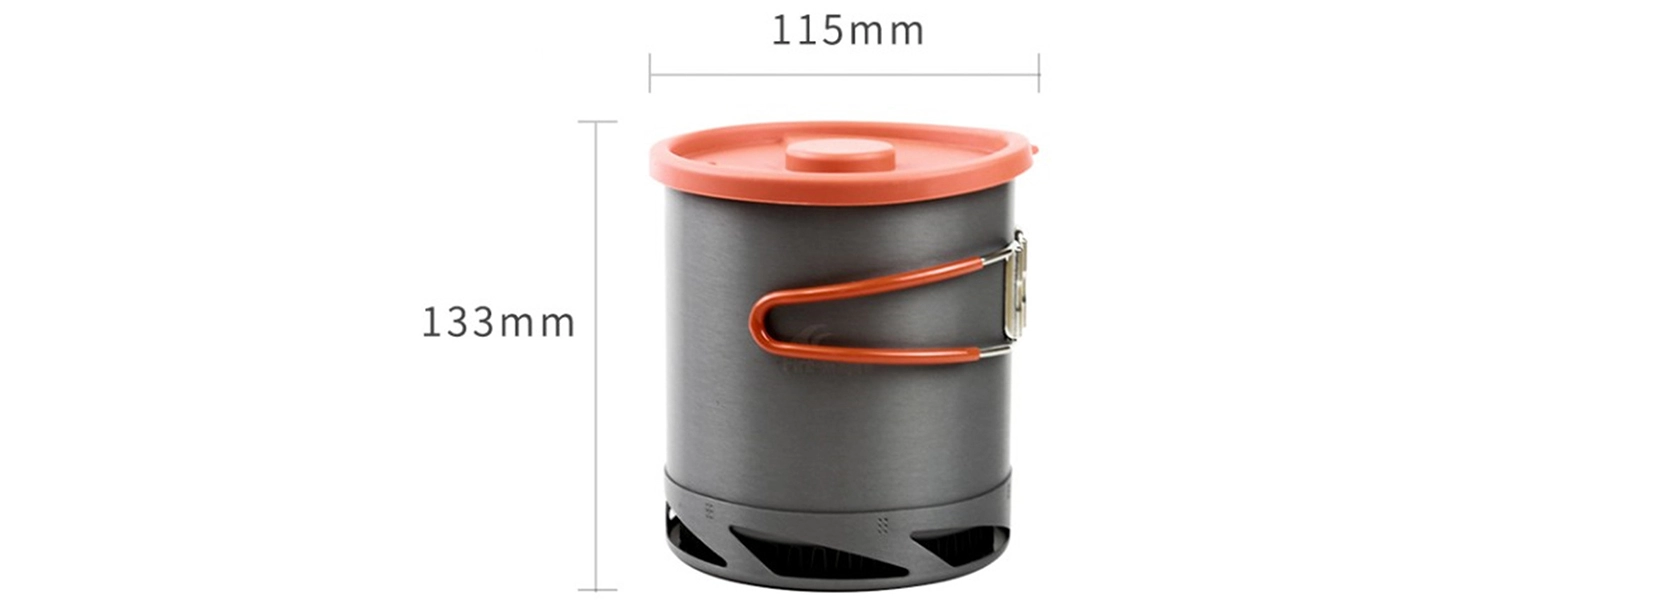 details of Solo Camping Pot with Heat Exchanger System